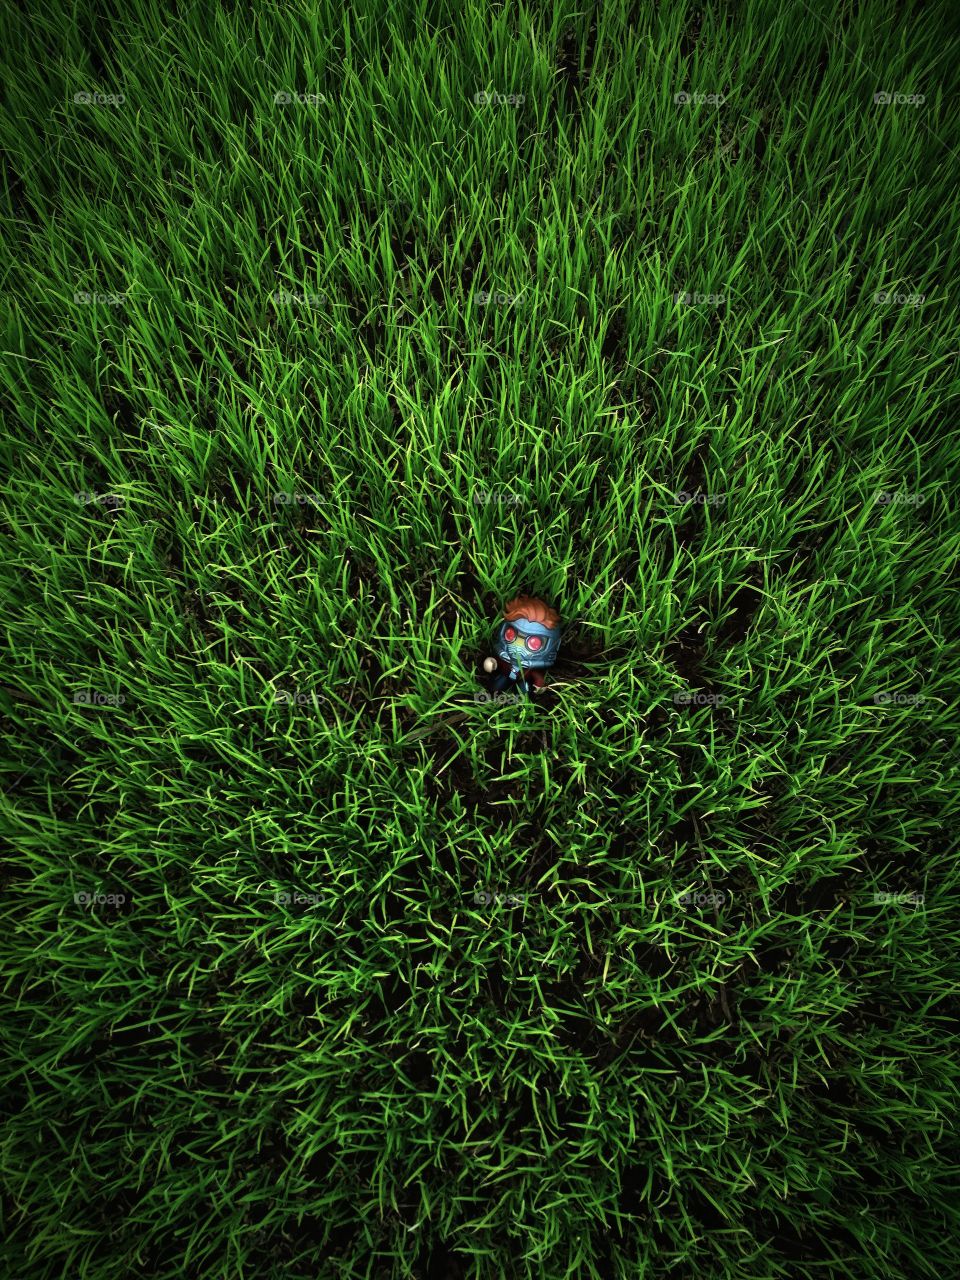 Grass, Desktop, No Person, Insect, Ladybug